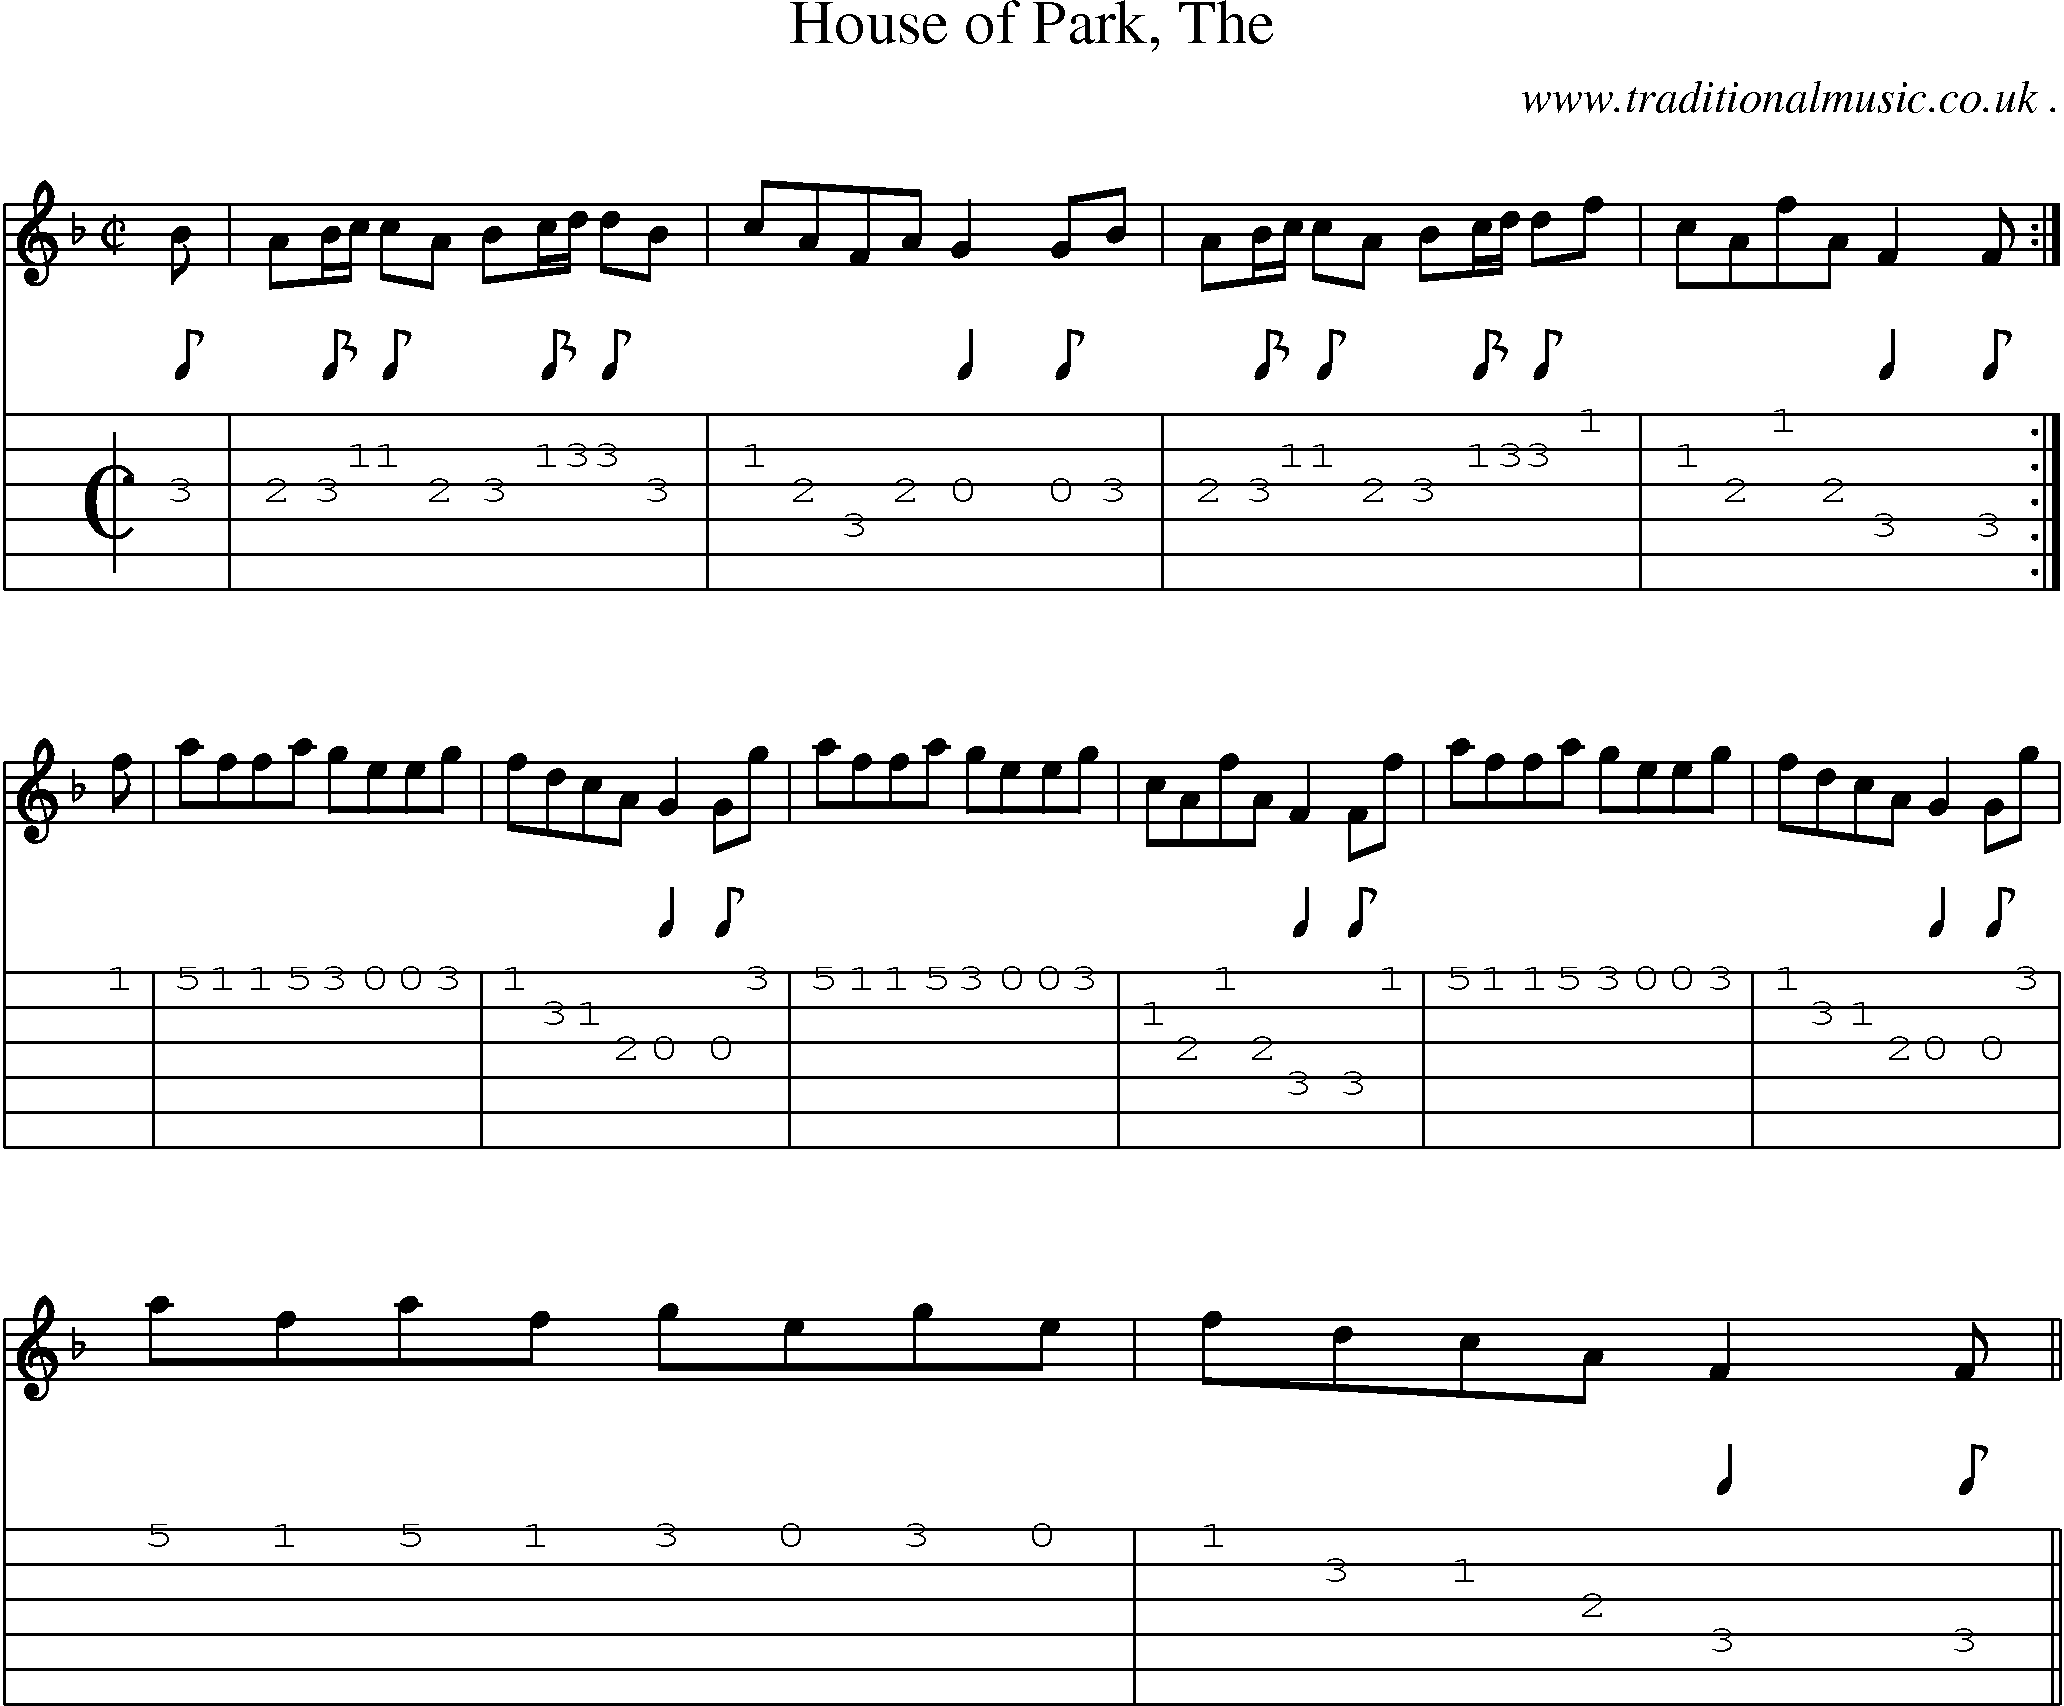 Sheet-music  score, Chords and Guitar Tabs for House Of Park The